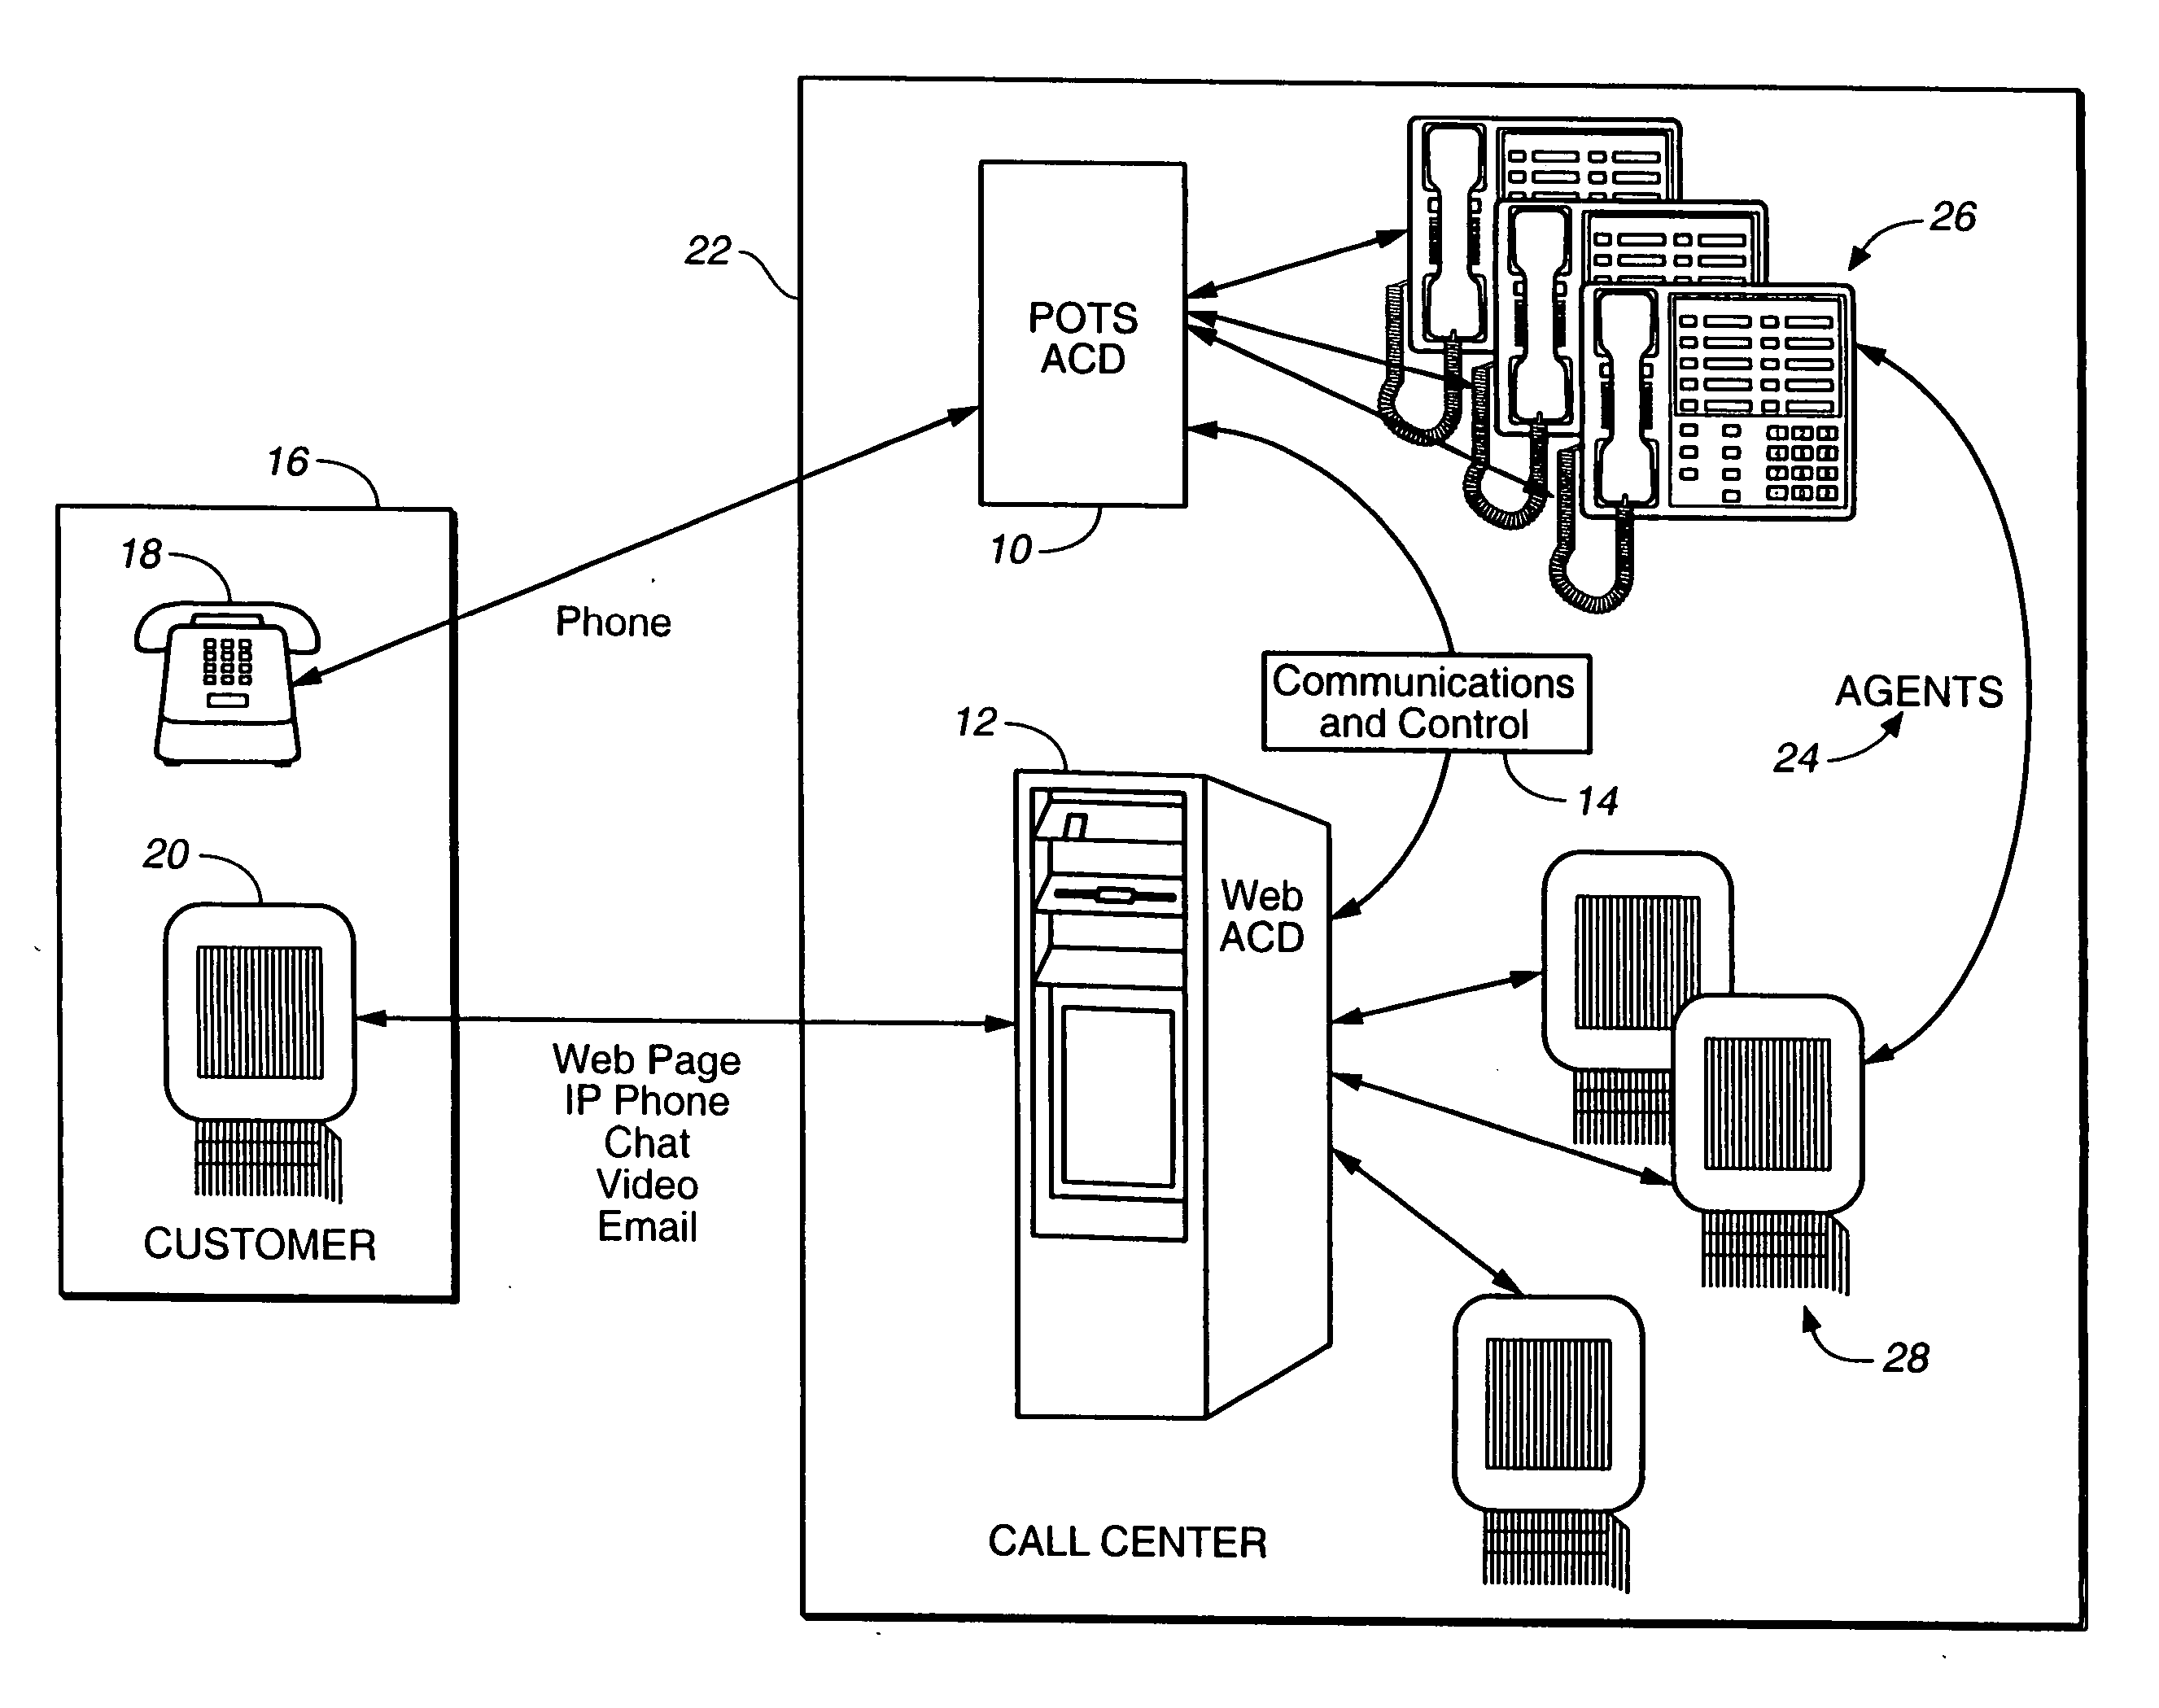 Automatic call distribution system using computer network-based communication